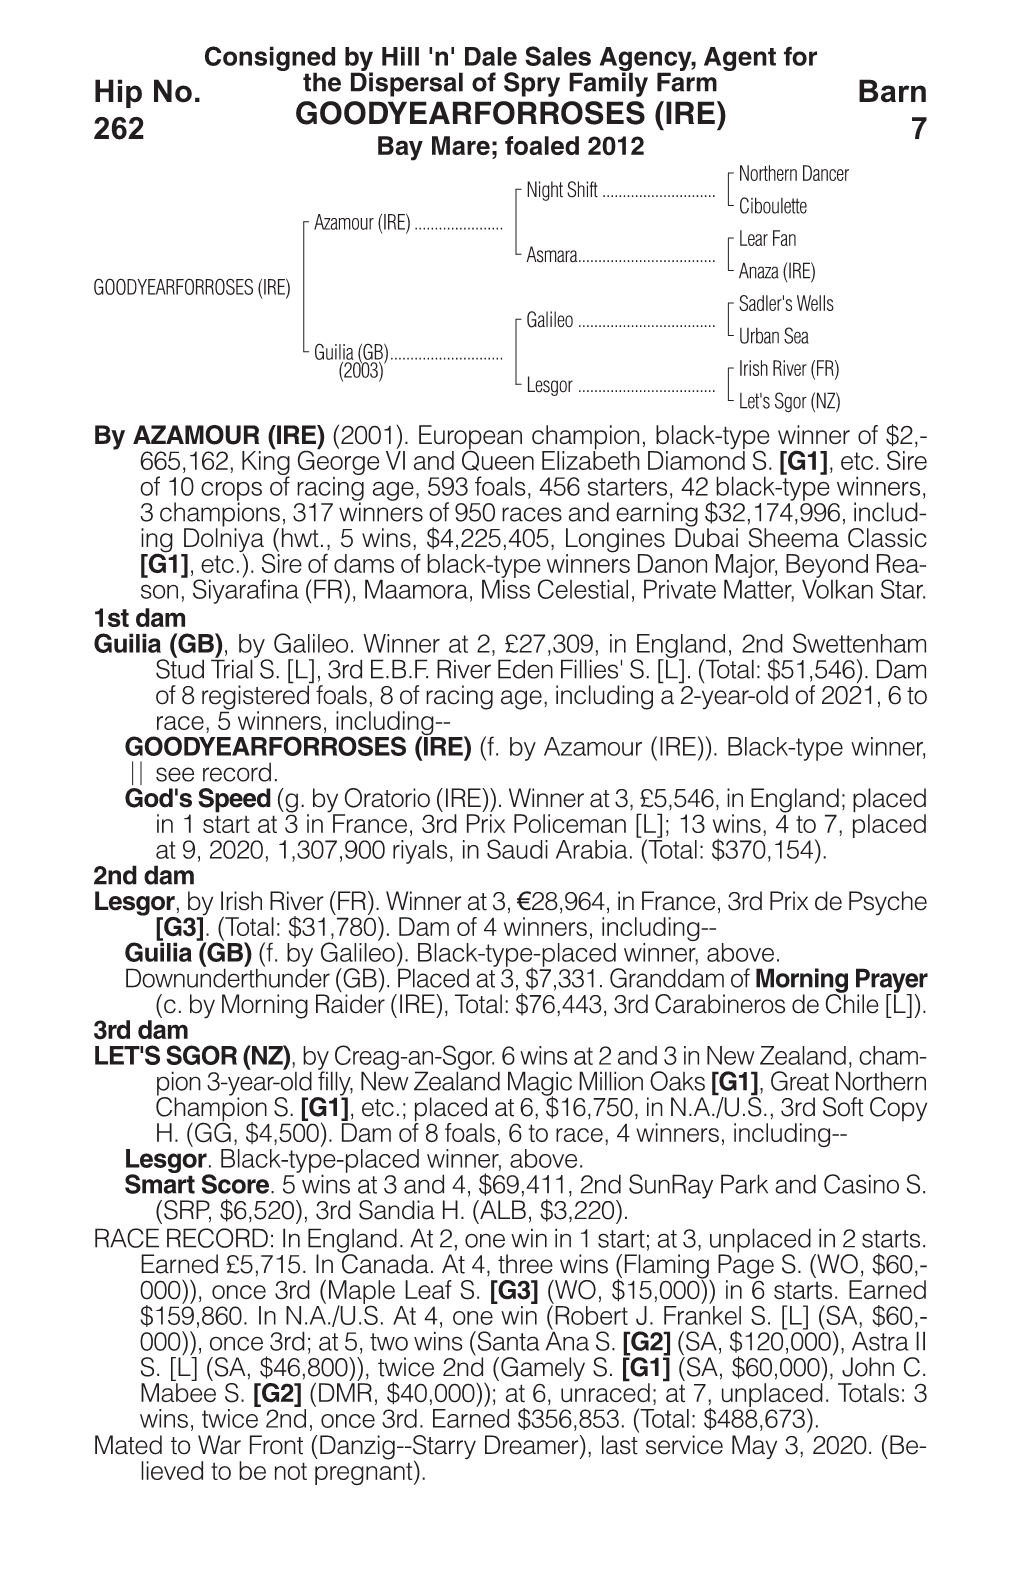 GOODYEARFORROSES (IRE) Barn 262 Bay Mare; Foaled 2012 7 Northern Dancer Night Shift